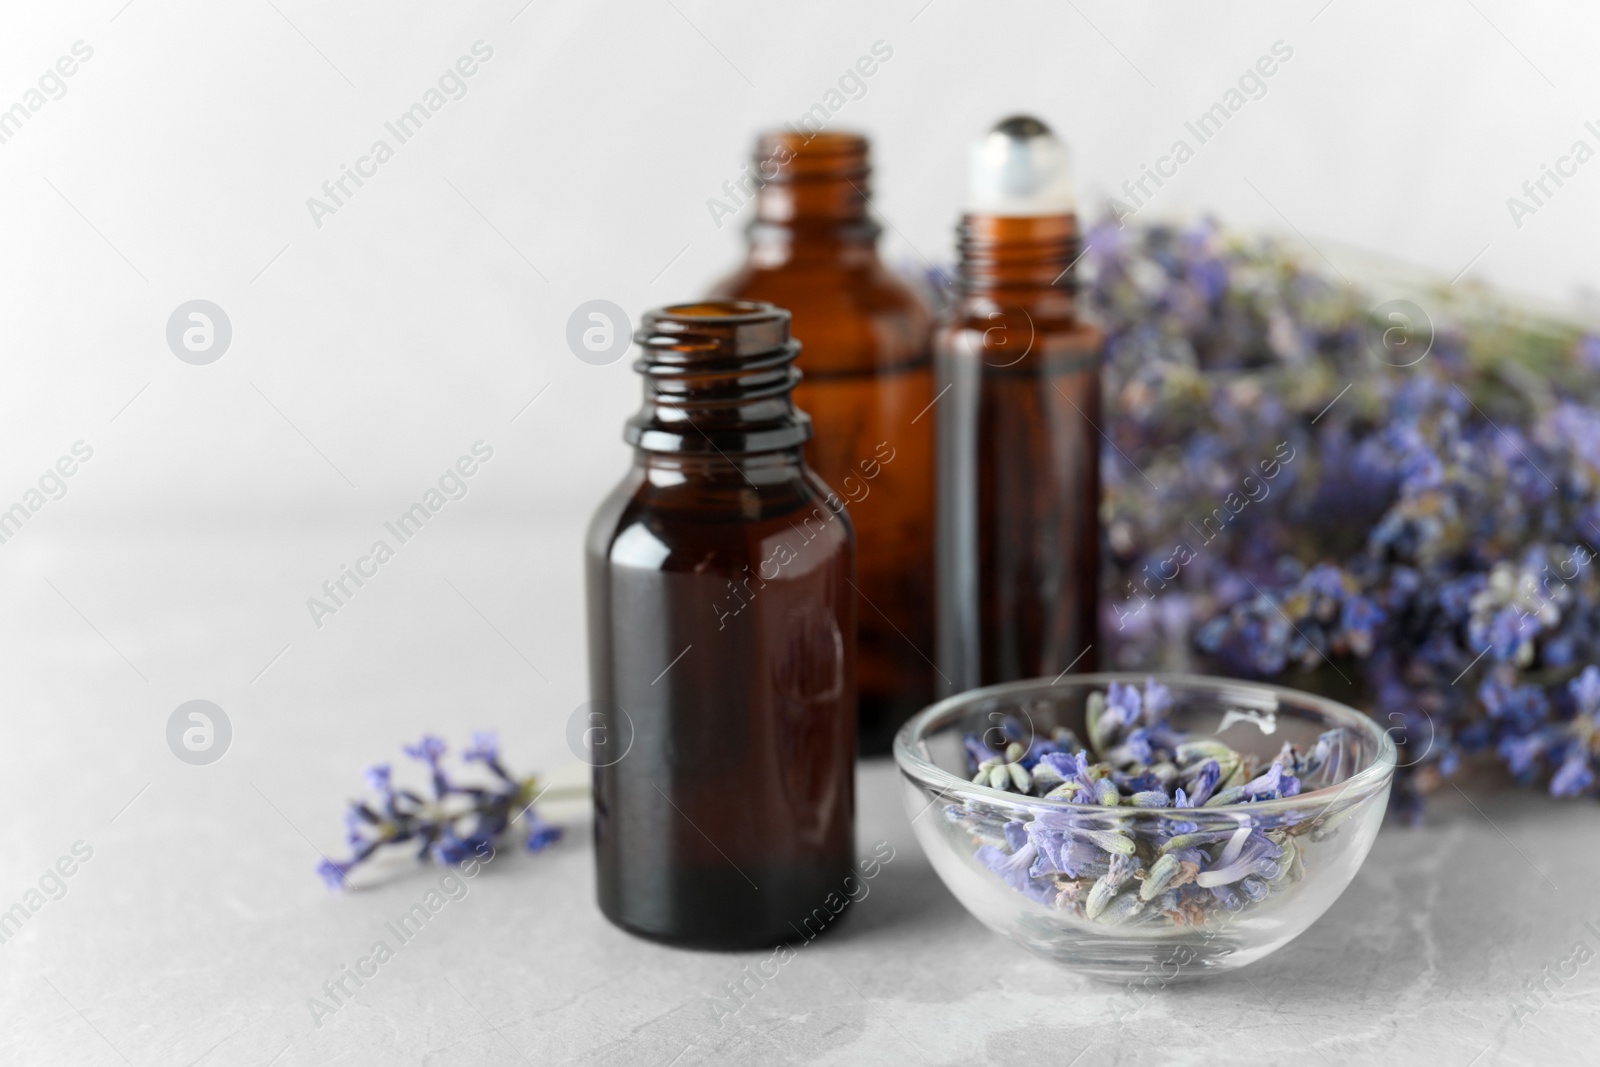 Photo of Bottles of essential oil and lavender flowers on stone table against light background. Space for text